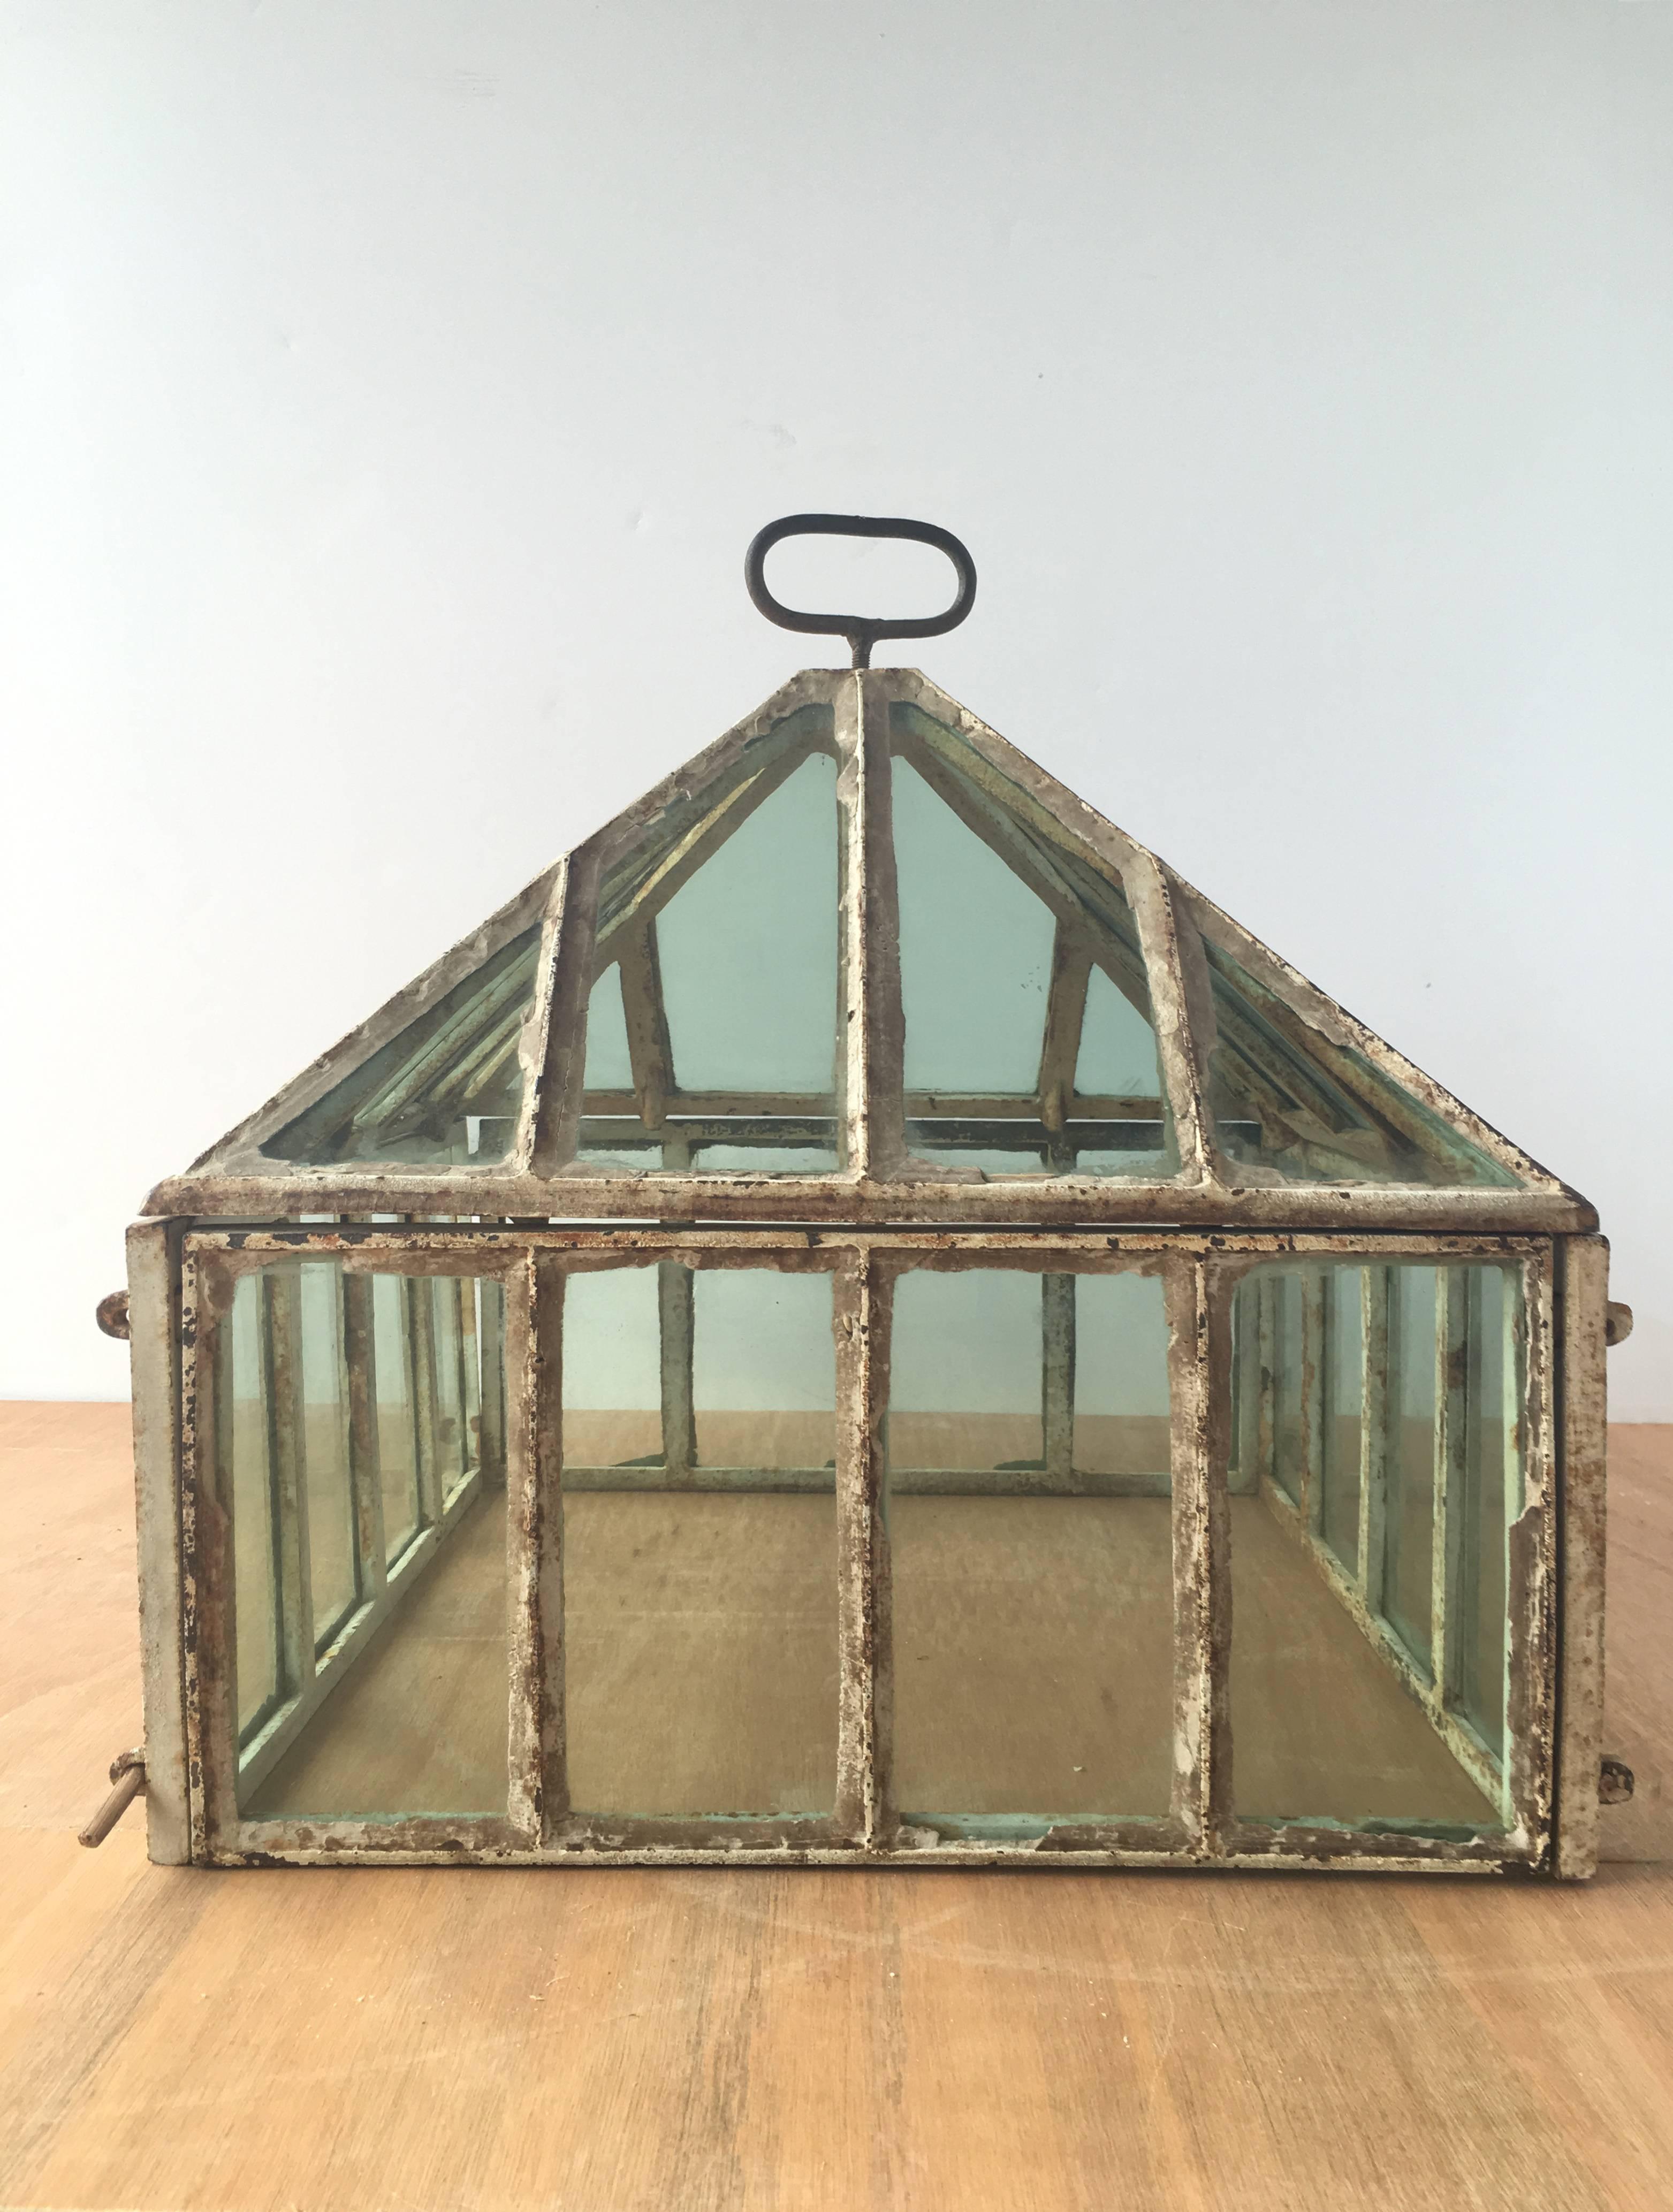 Vintage English iron and green glass cold frame greenhouse, circa 1860. 

Historically also known as a cucumber frame in the Victorian era; the lid lifts off with the handle, and sides close with wooden pegs. 

Can be use decoratively indoors or in